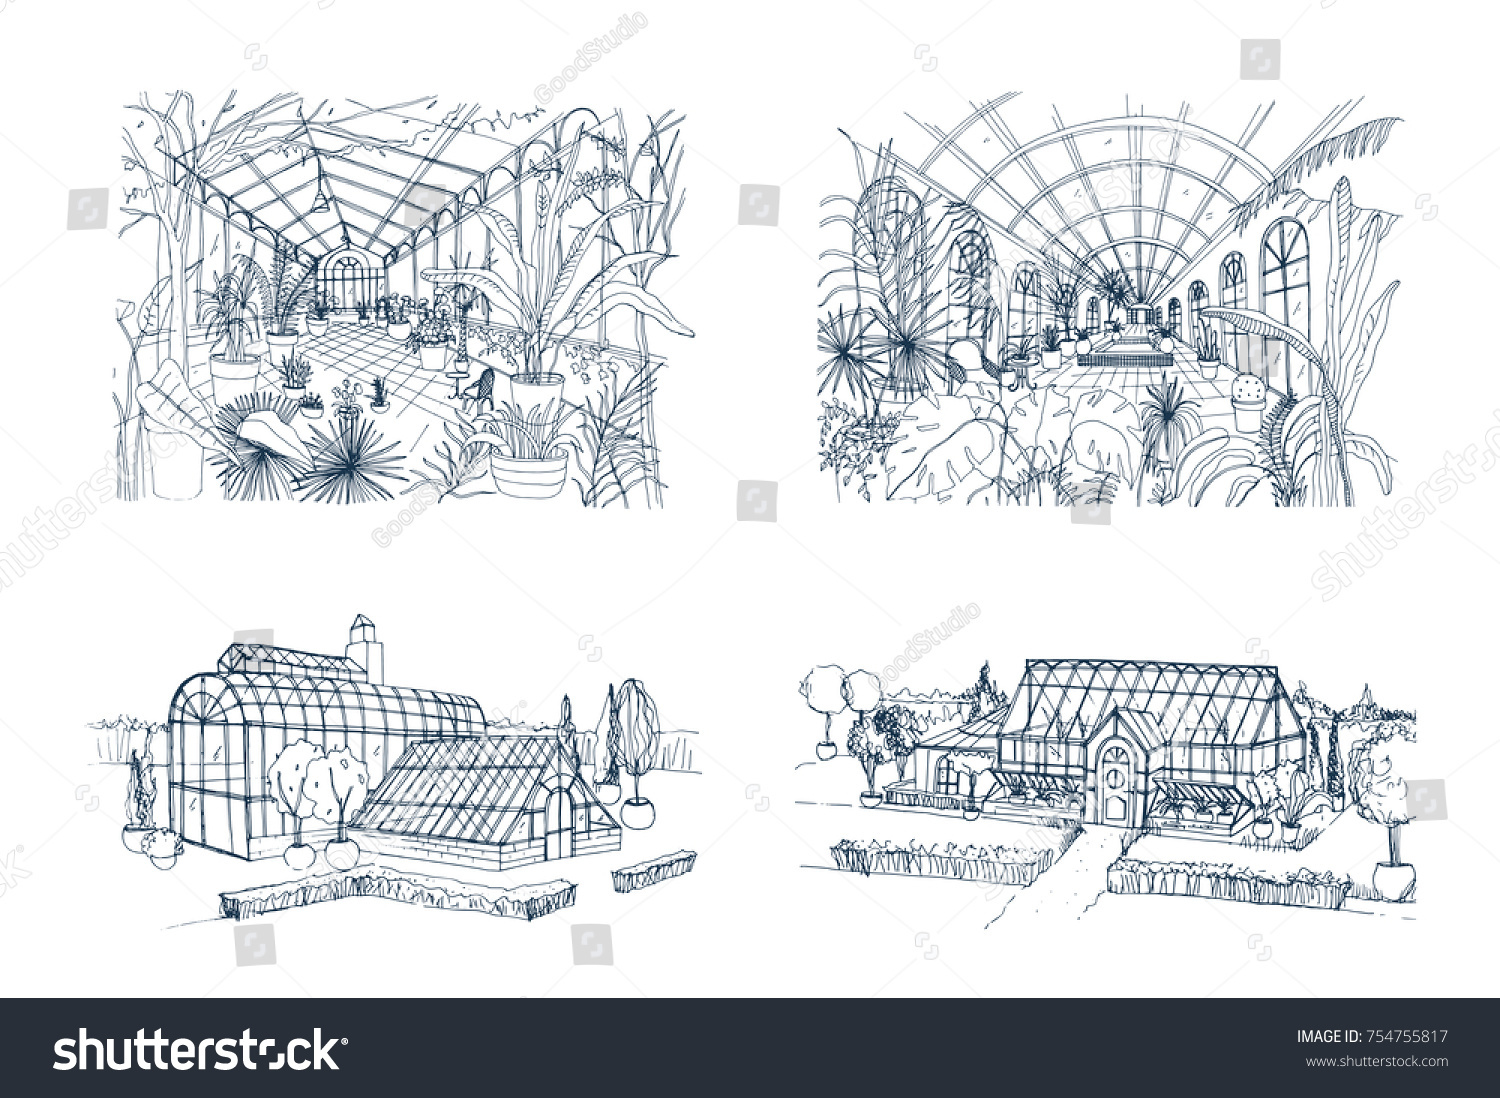 SVG of Bundle of freehand drawings of greenhouses full of jungle plants. Set of sketches of glasshouses with palm exotic trees growing in pots. Interior and exterior views. Monochrome vector illustration. svg